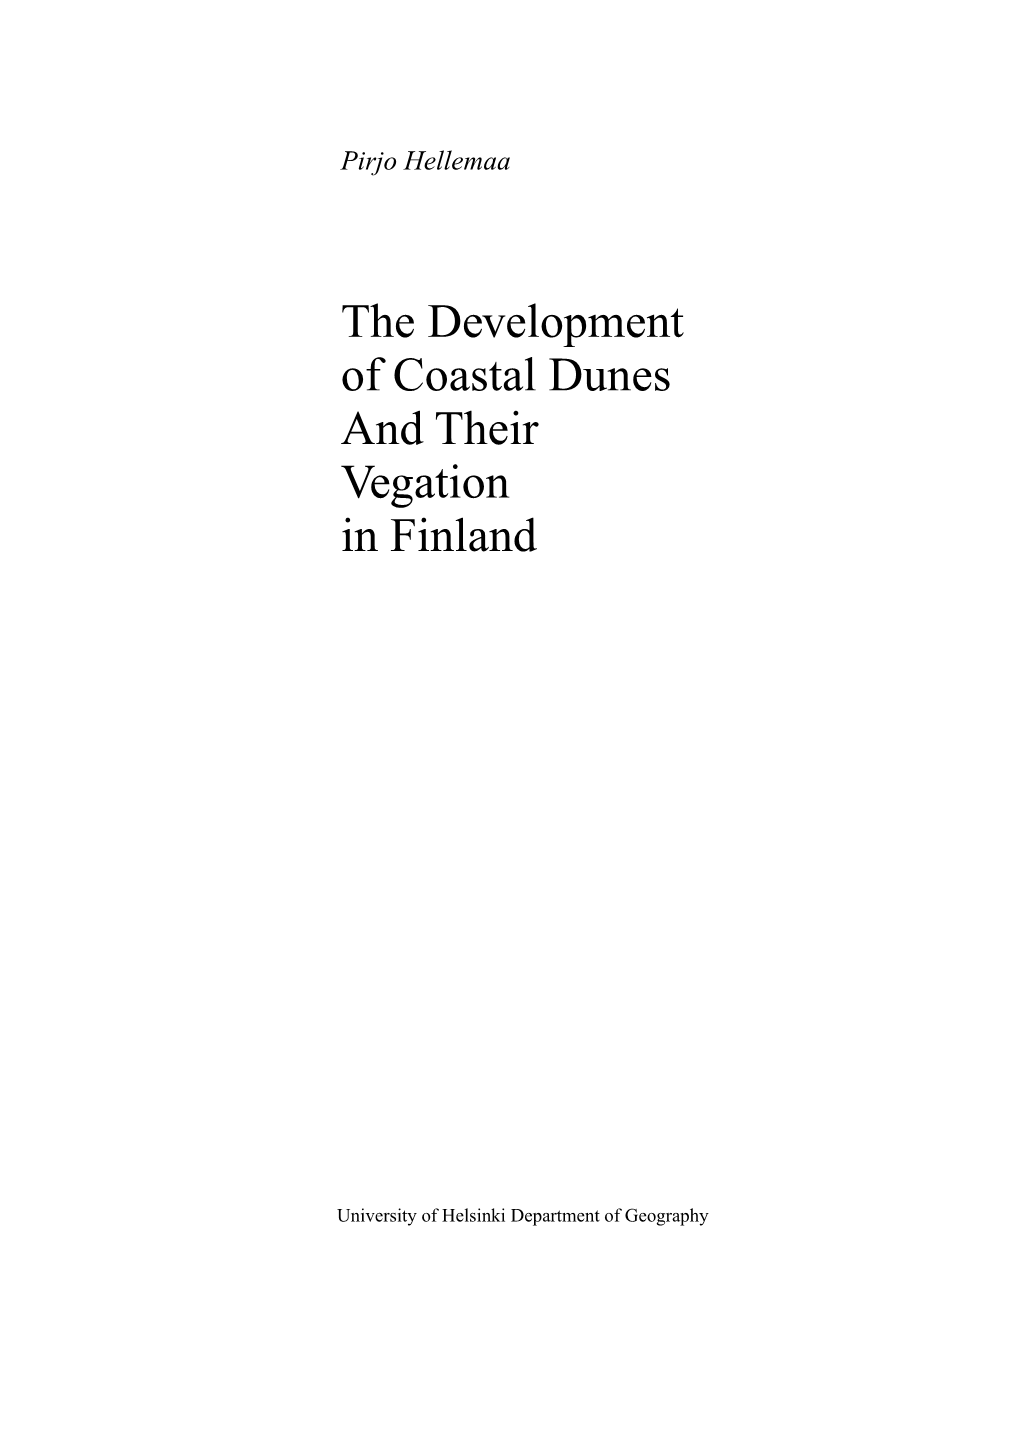 The Development of Coastal Dunes and Their Vegetation in Finland